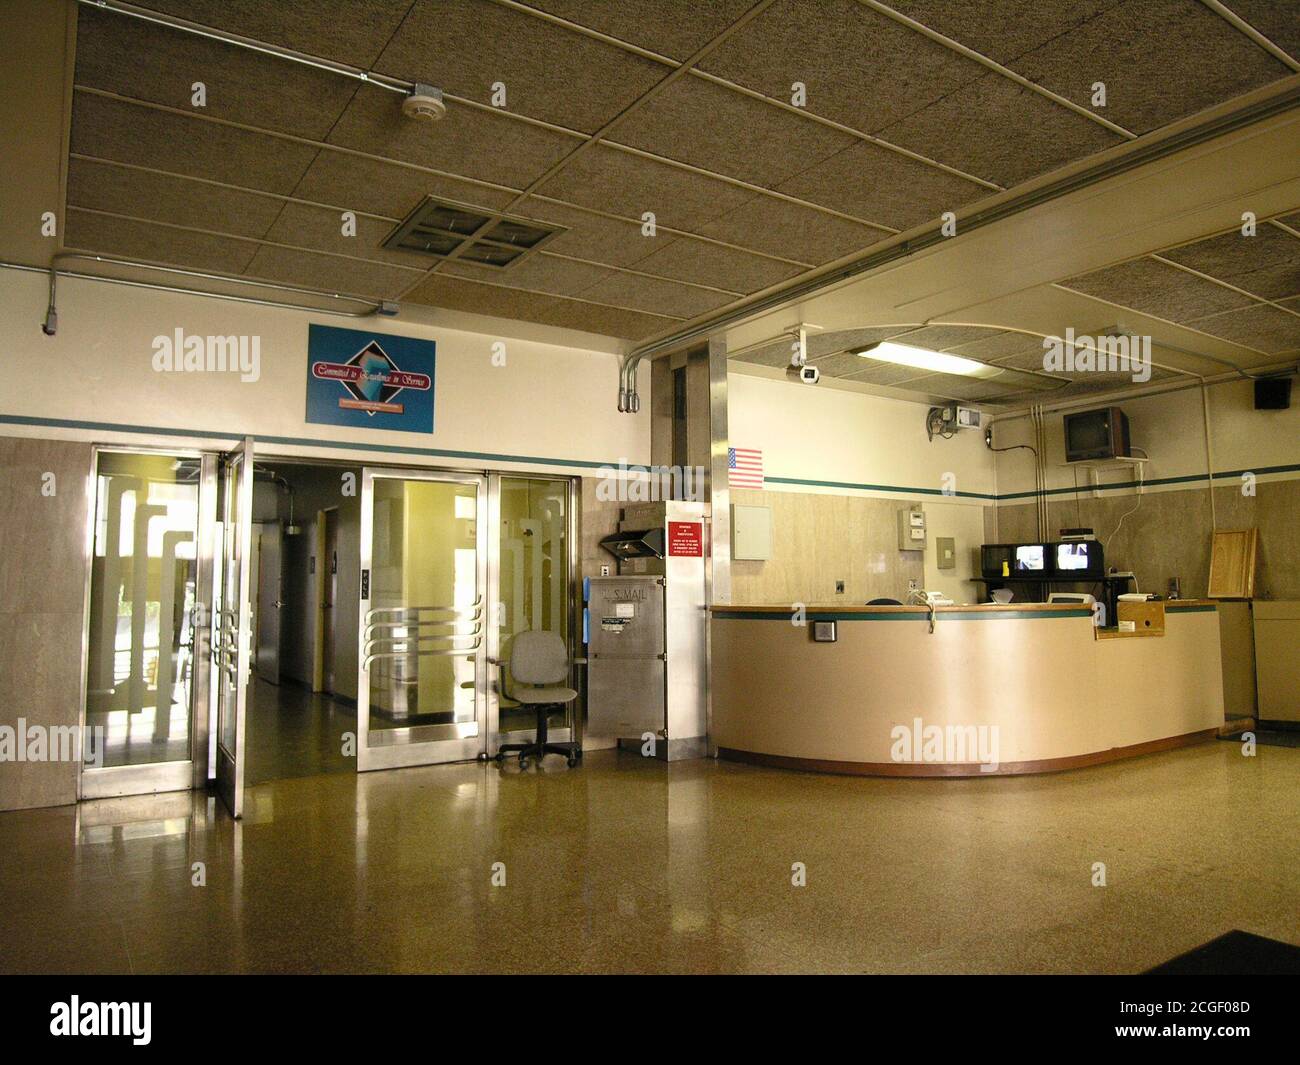 Los Angeles, California, USA - January 2005:  Archival view of the old Department of Transportation Caltrans state office building lobby at 120 S Spring Street.  The building was torn down in 2006. Stock Photo